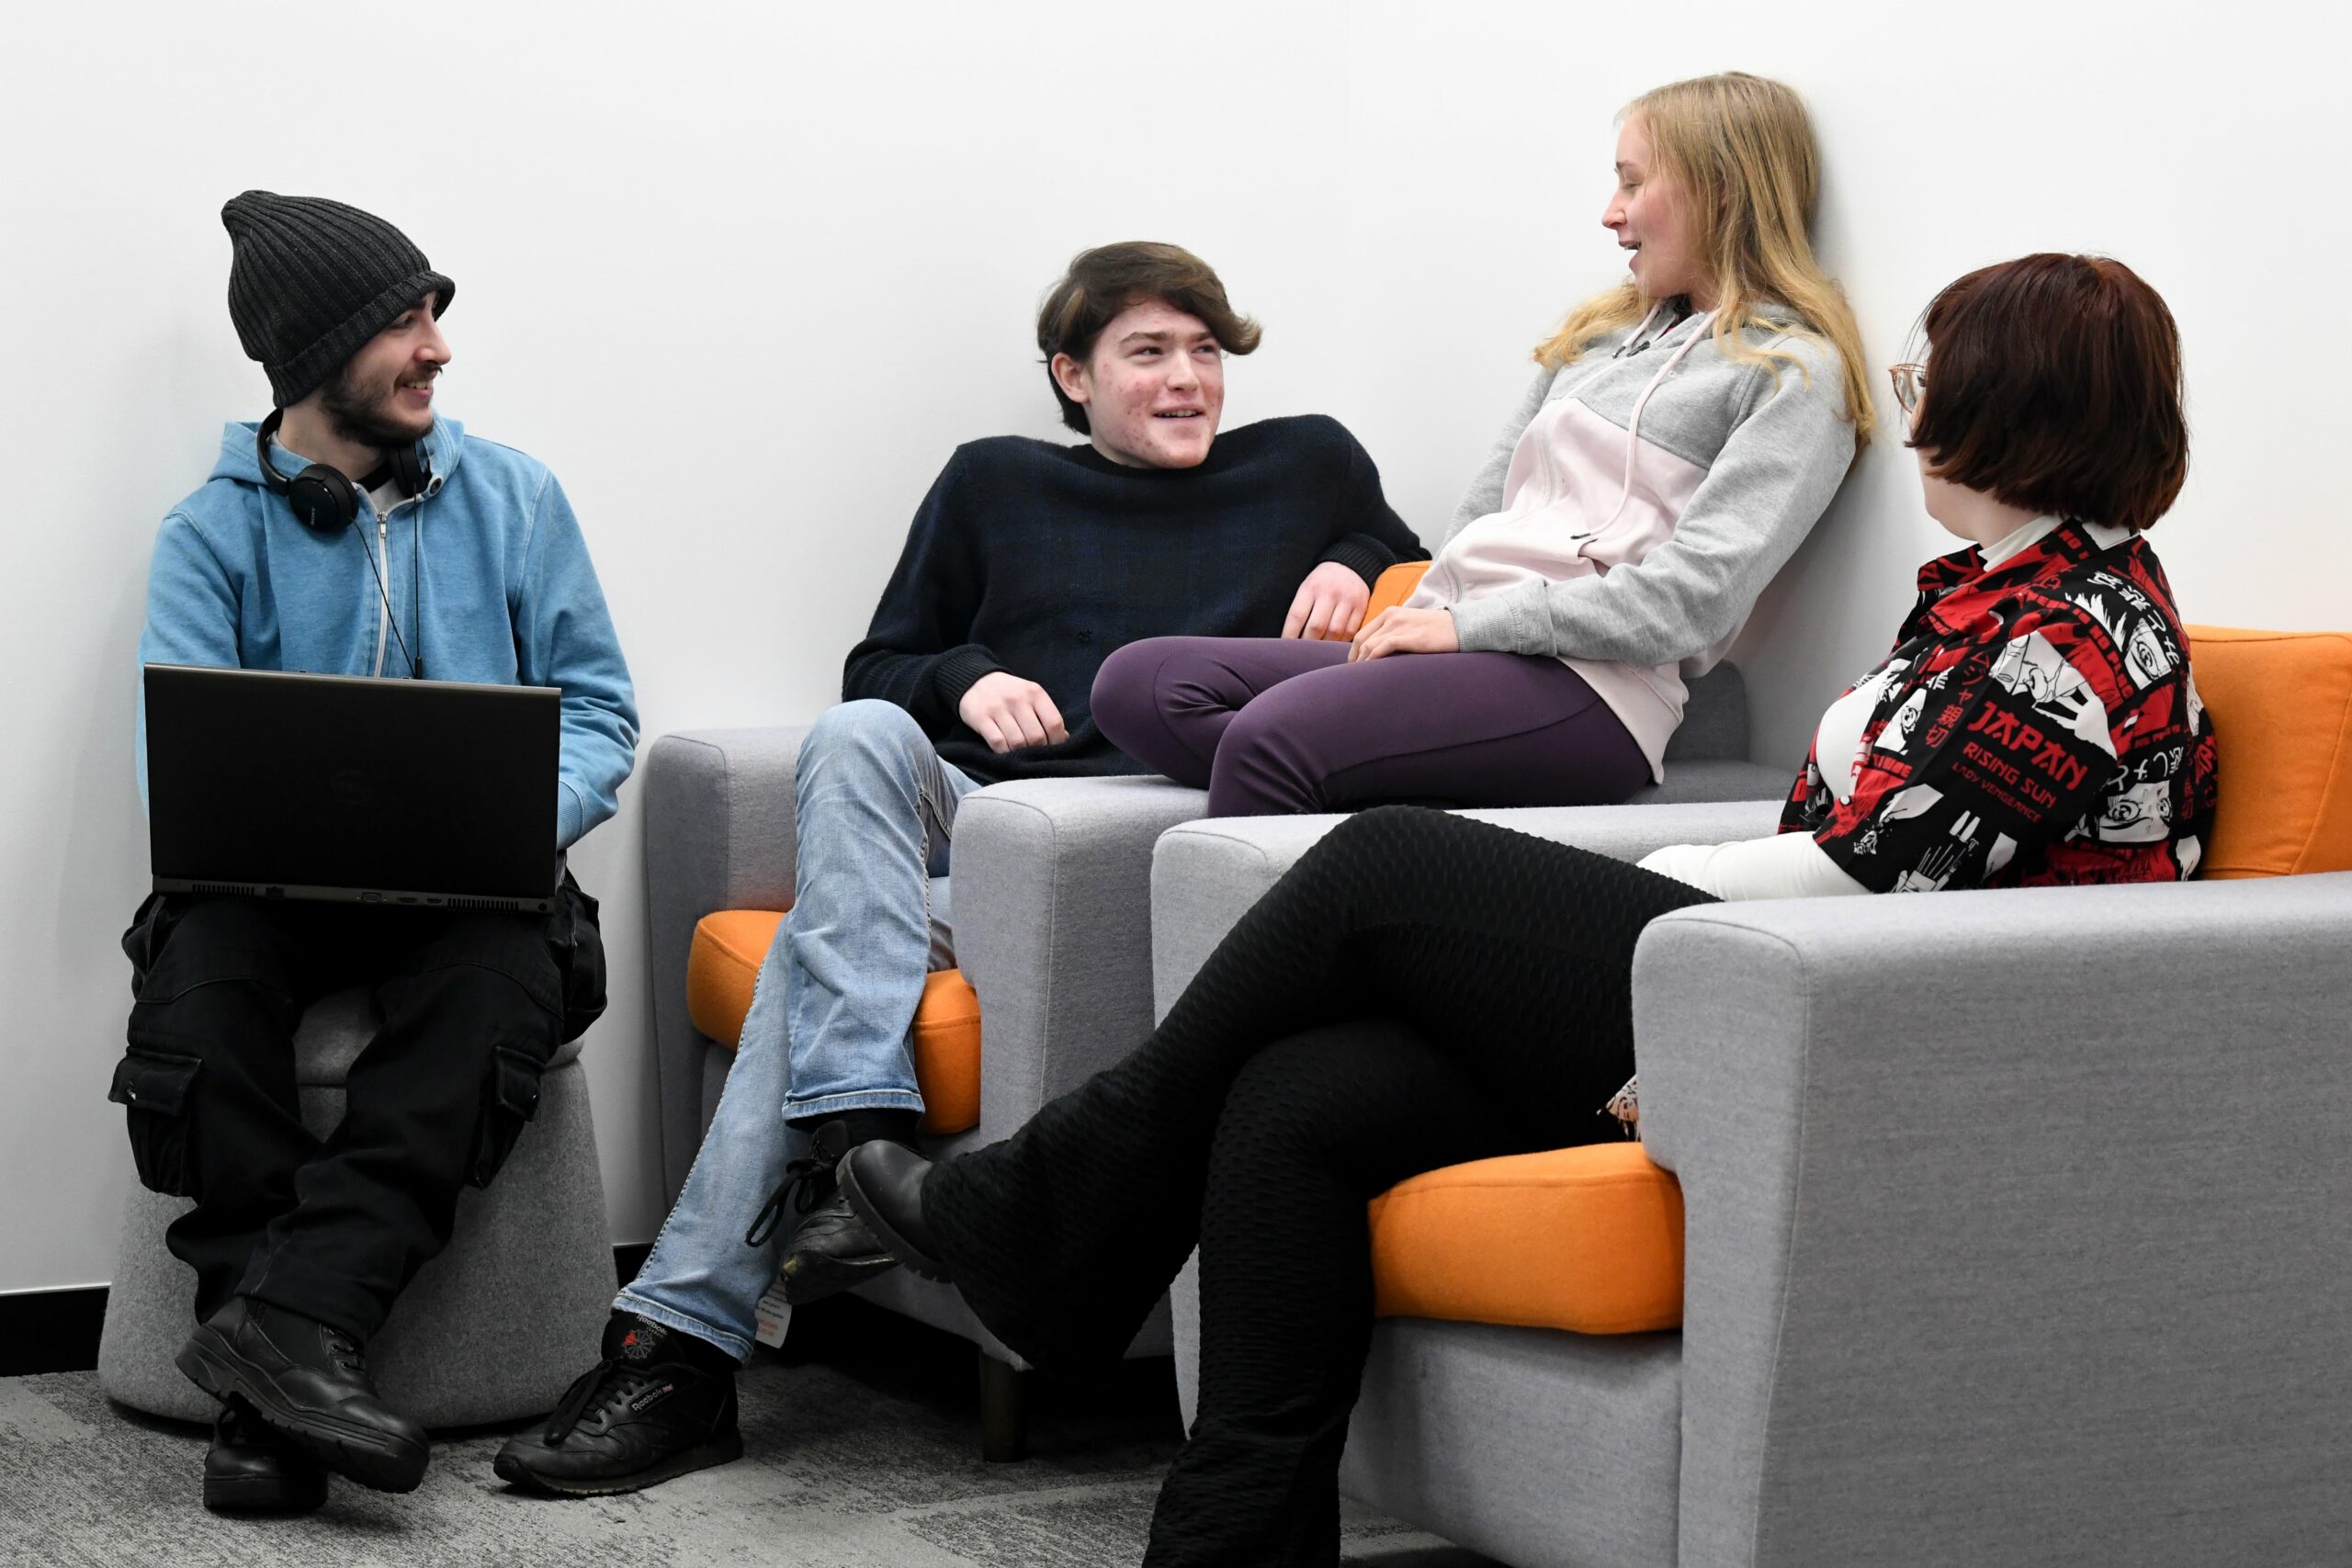 Group of students sat in a communal space talking